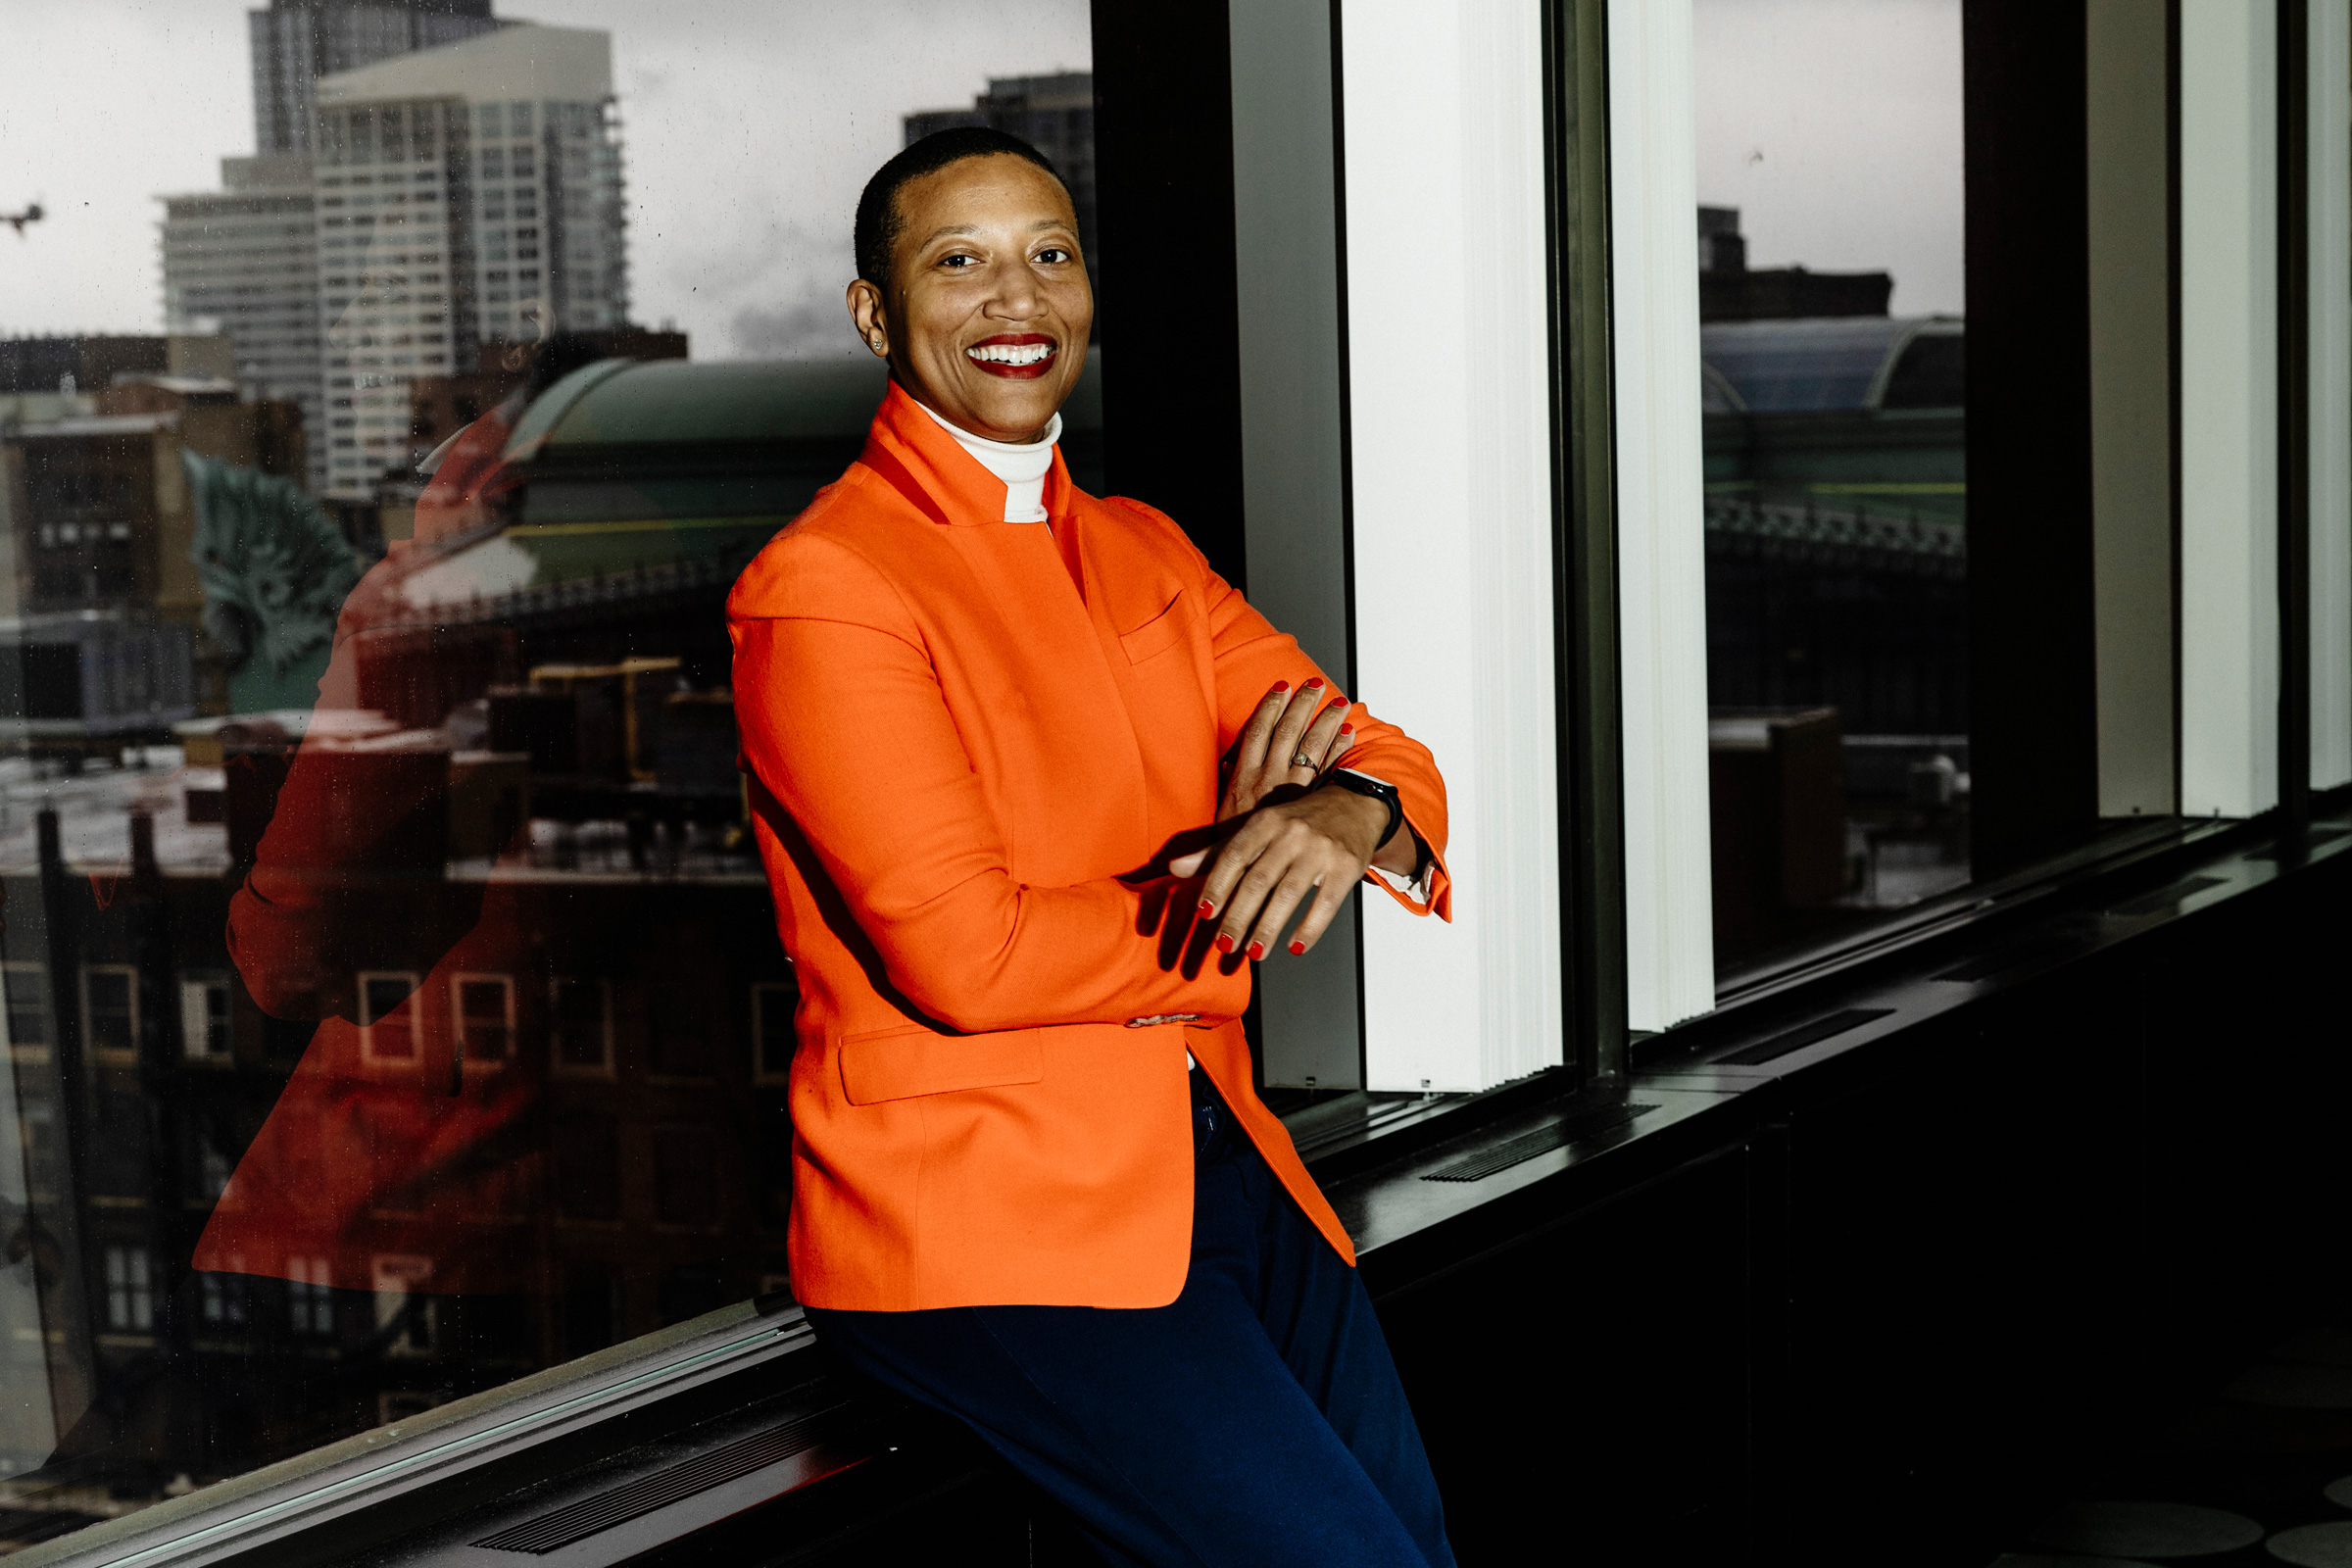 Kimberly Dowdell is on a Mission to Improve the Architecture and Design Industry